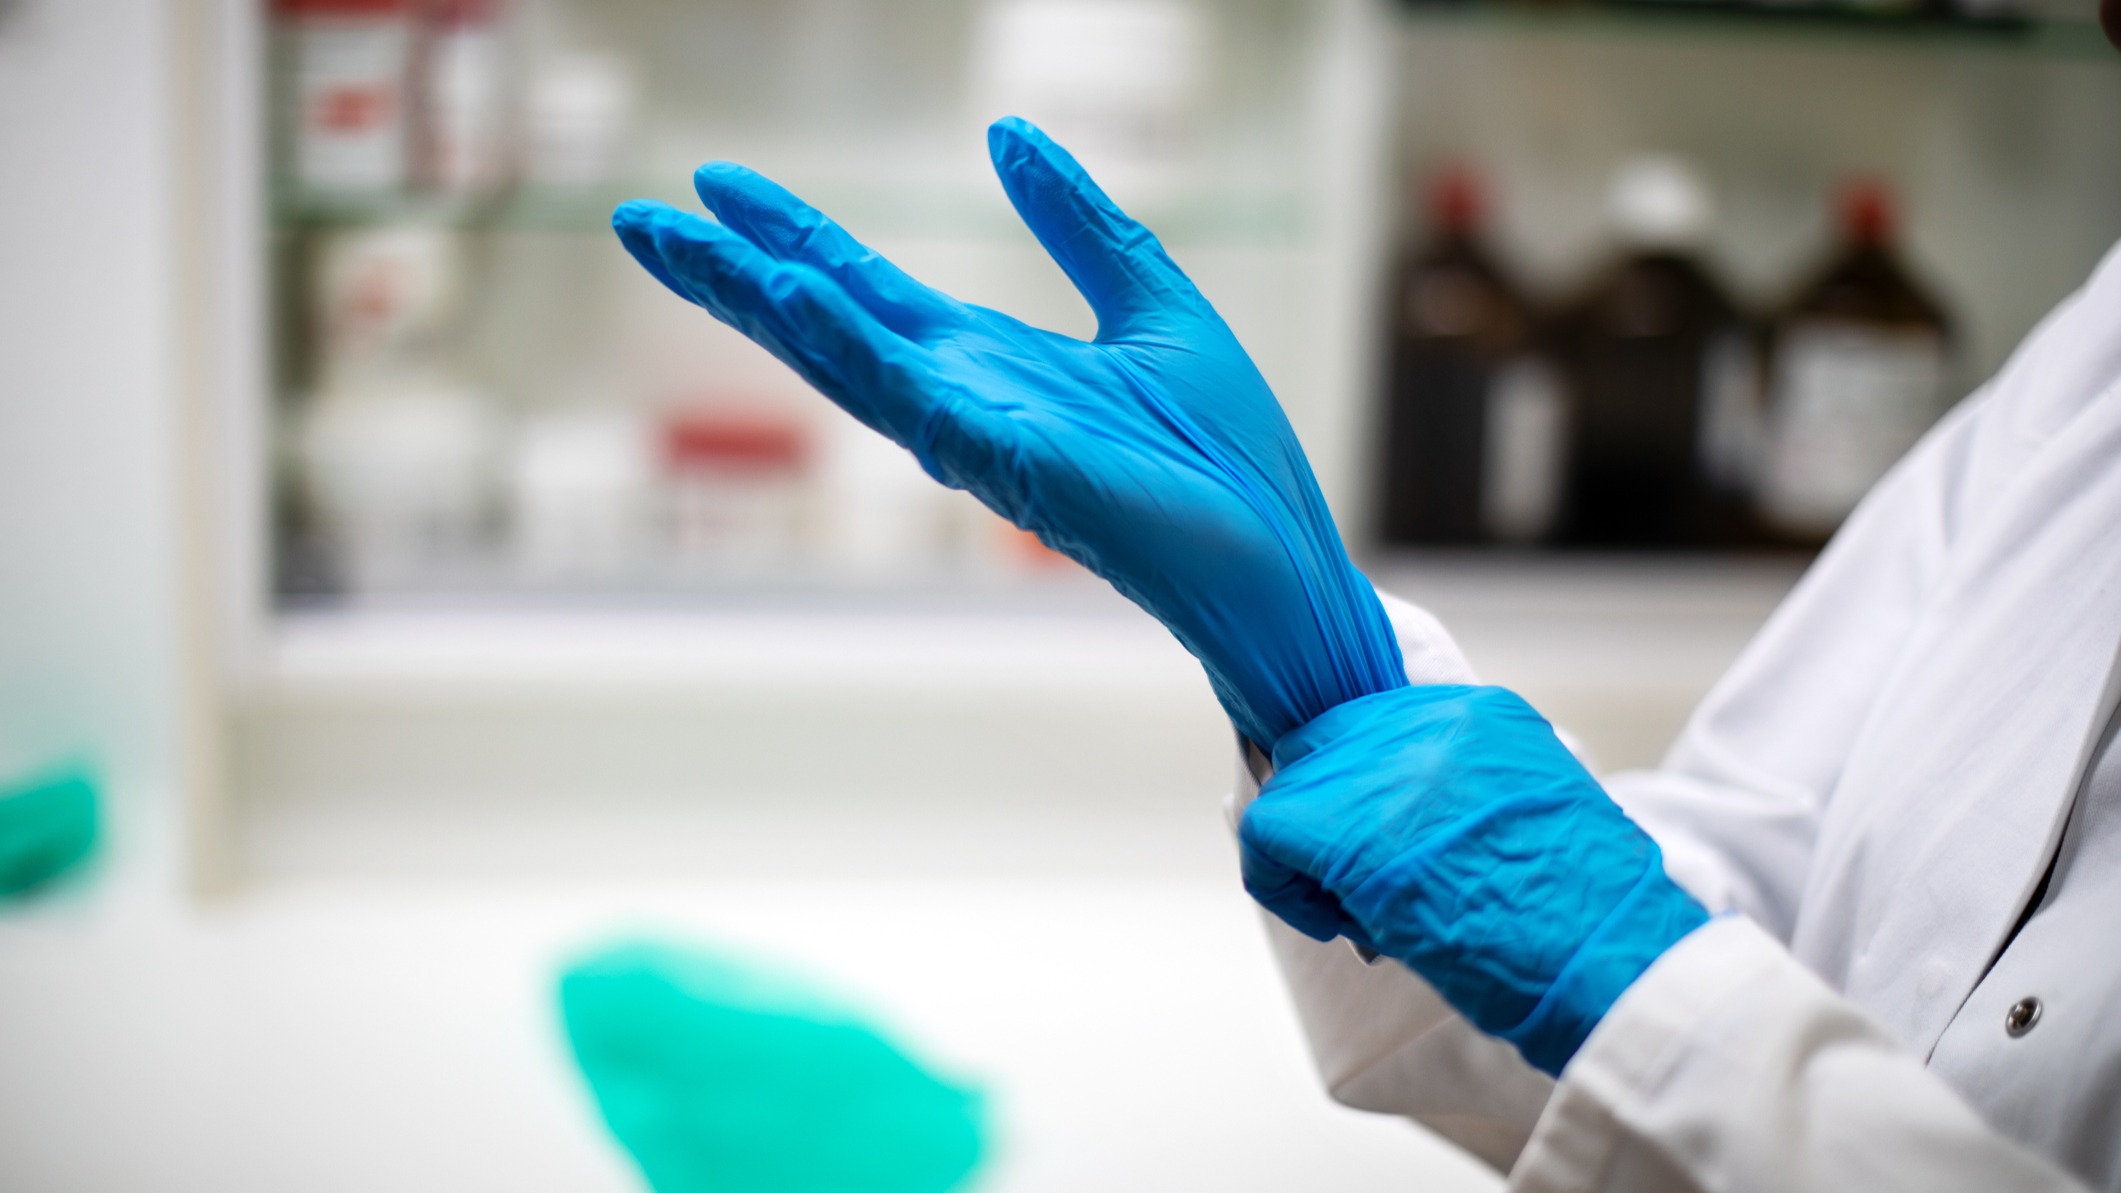 Gloved hands in a blurred lab setting